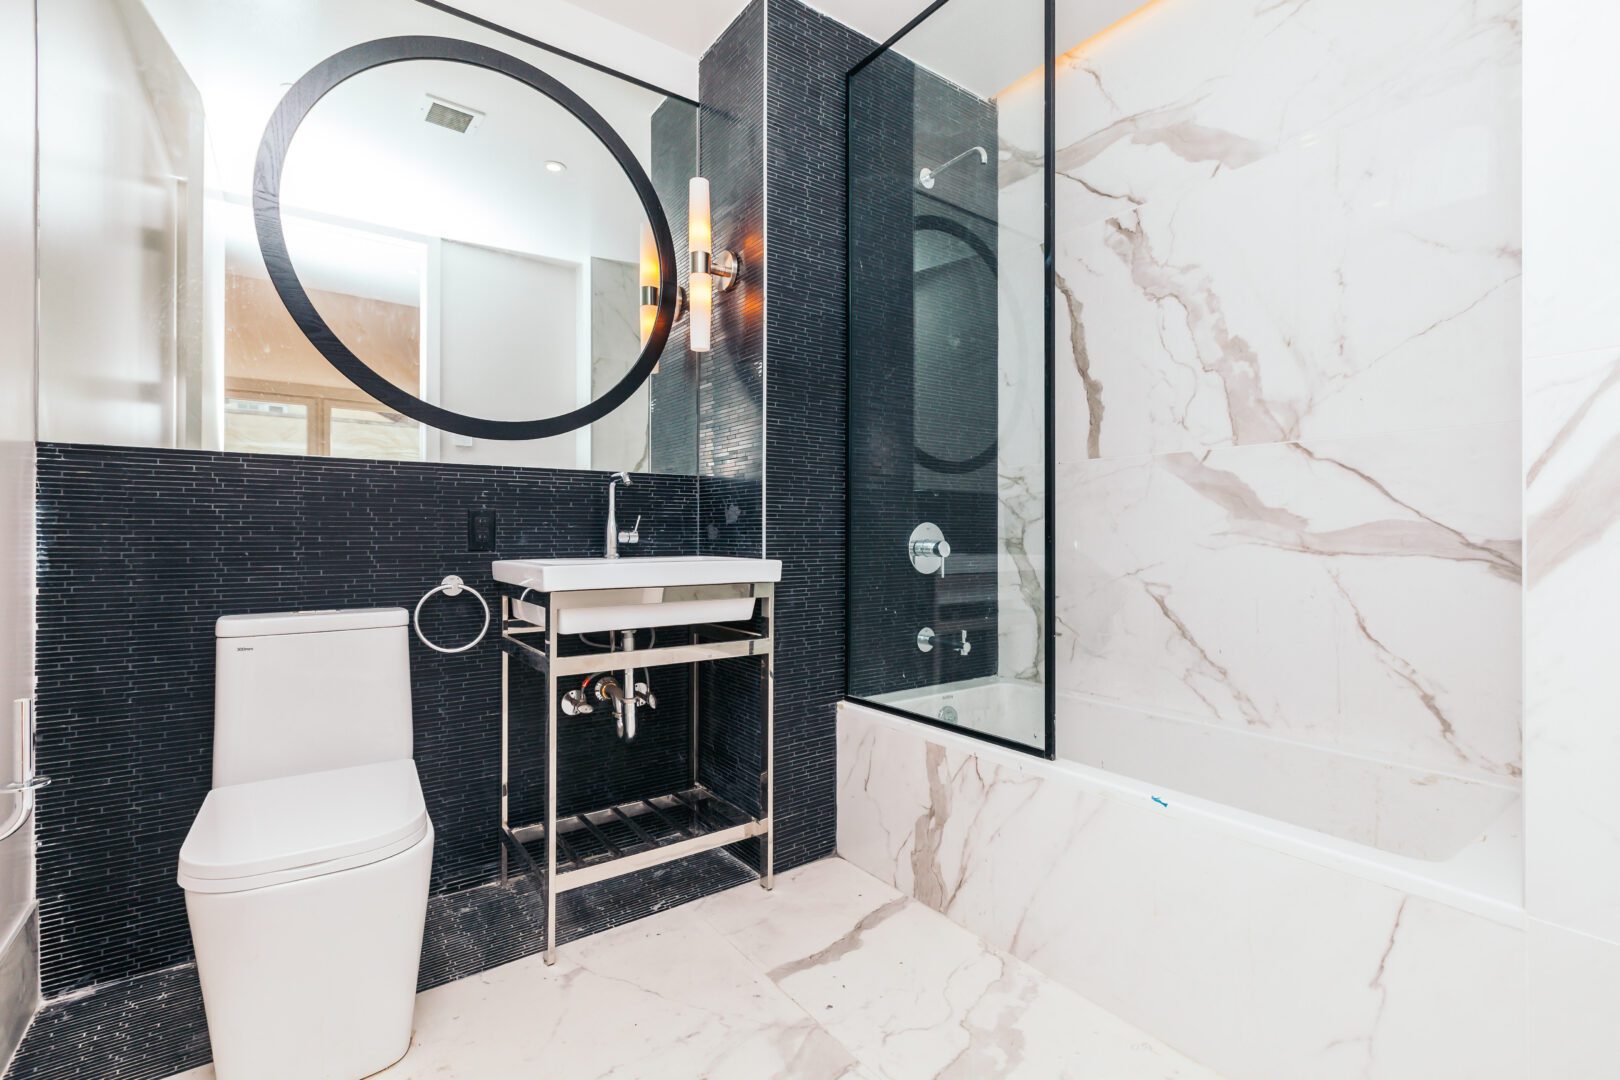 A bathroom with black and white marble walls